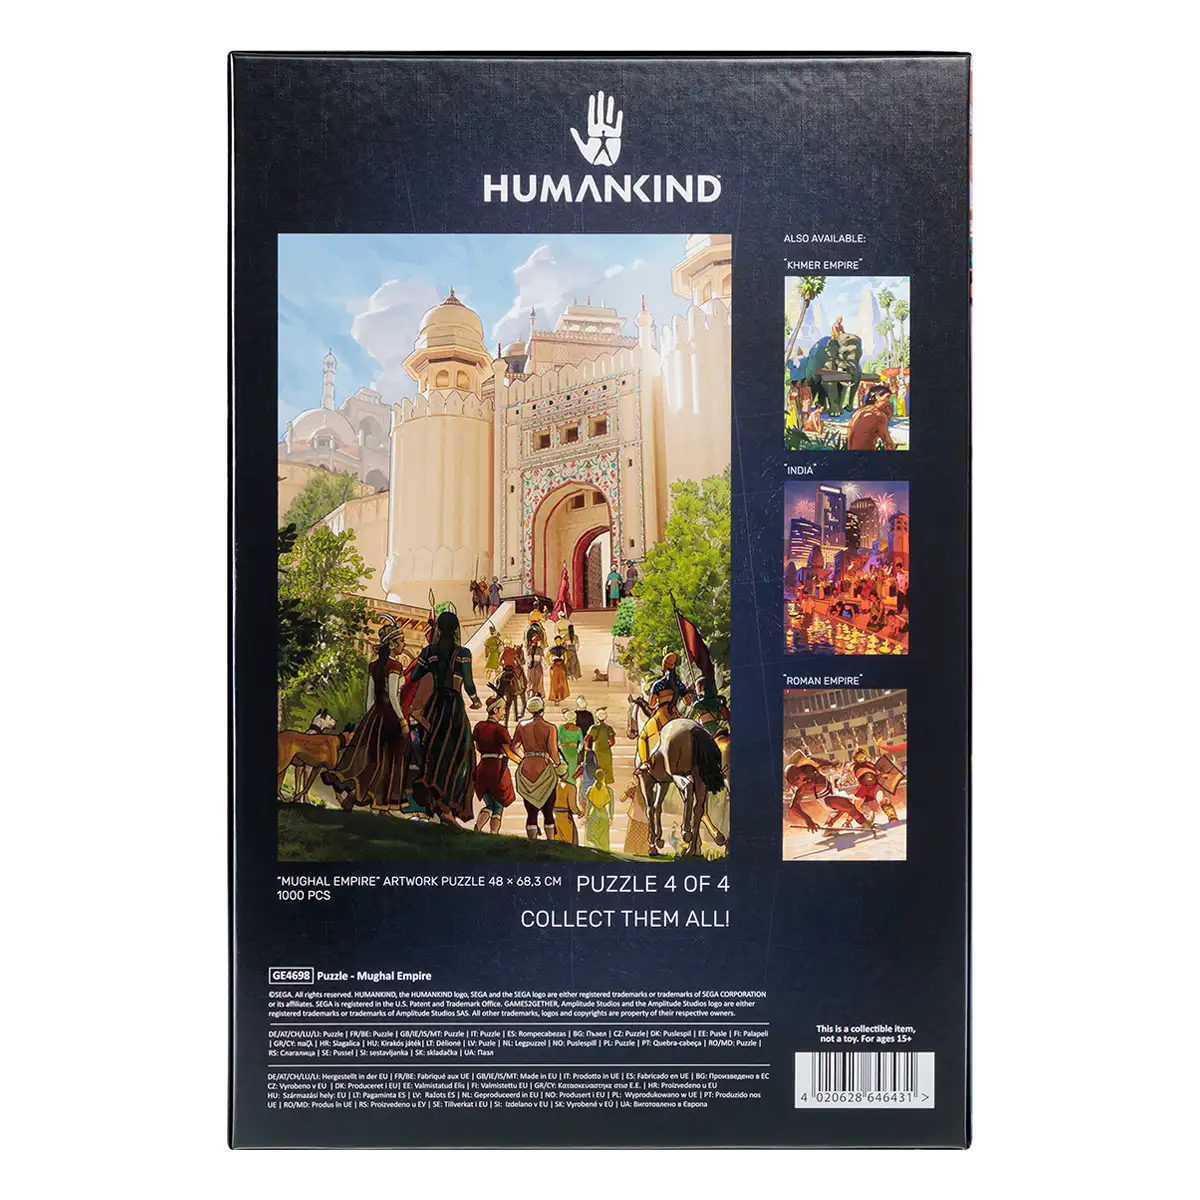 Humankind Puzzle "Mughal Empire" Image 4